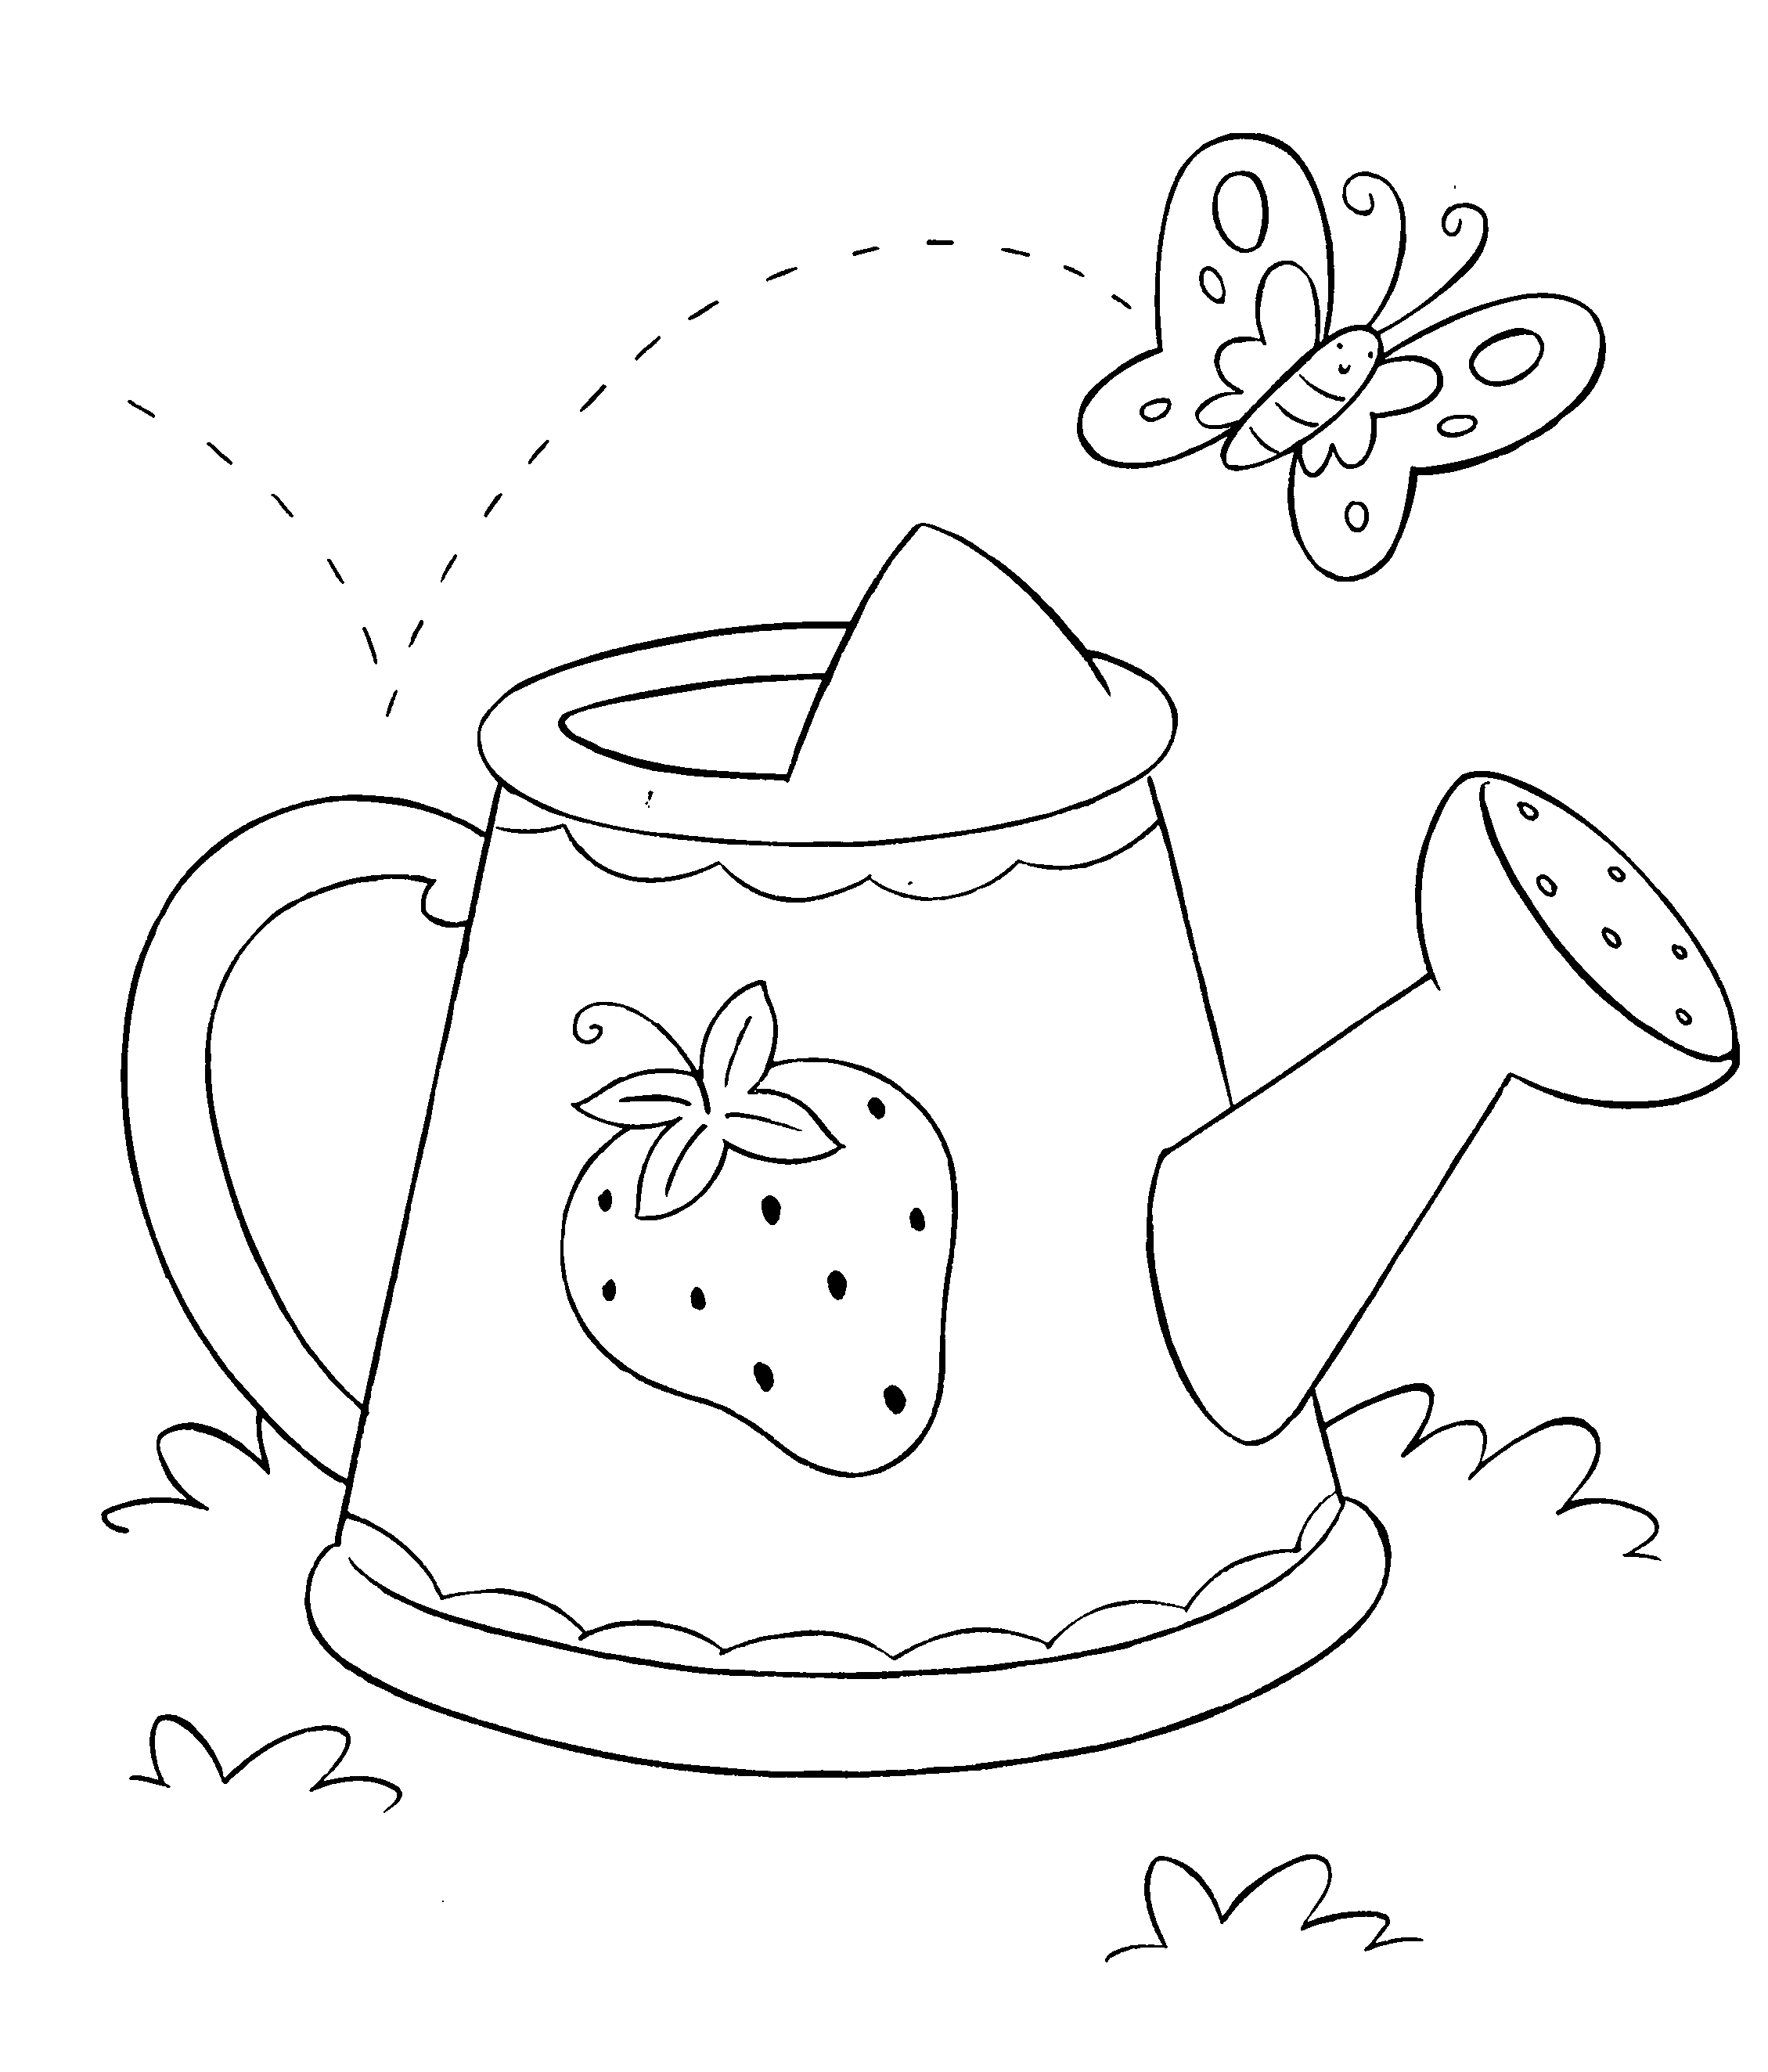 Watering Can Strawberry Shortcake coloring page